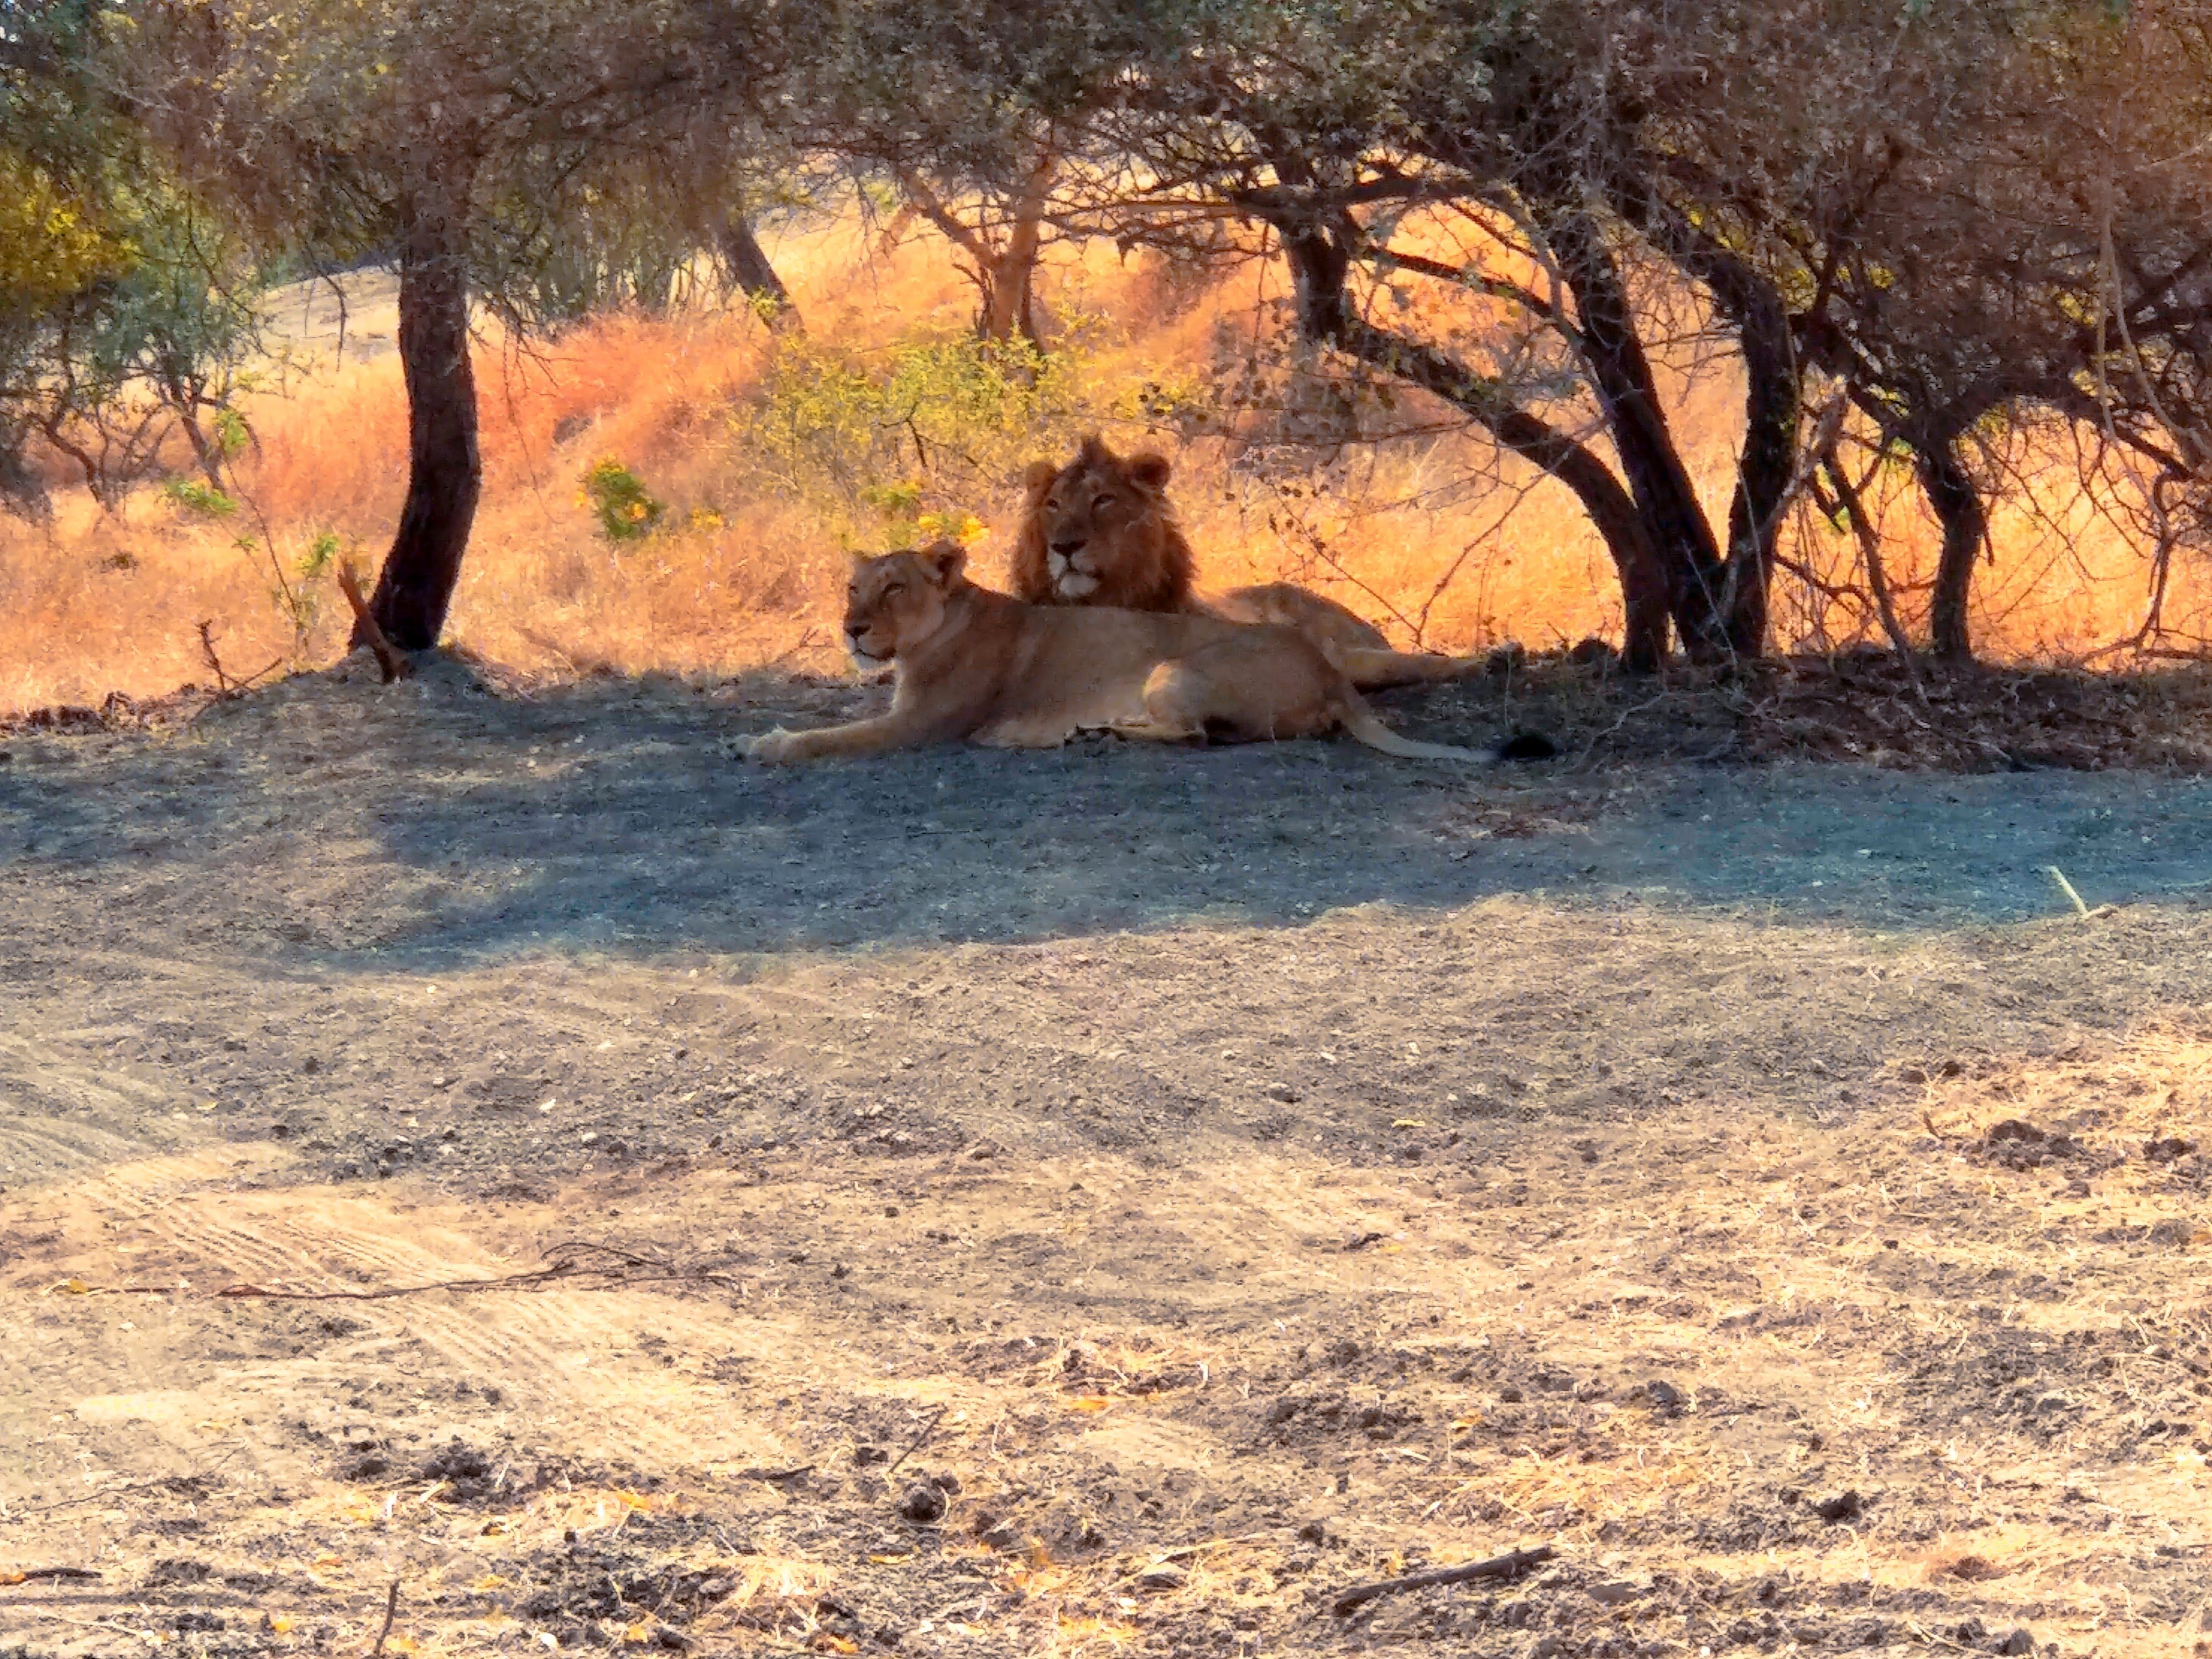 A lion and lioness seating under tree.